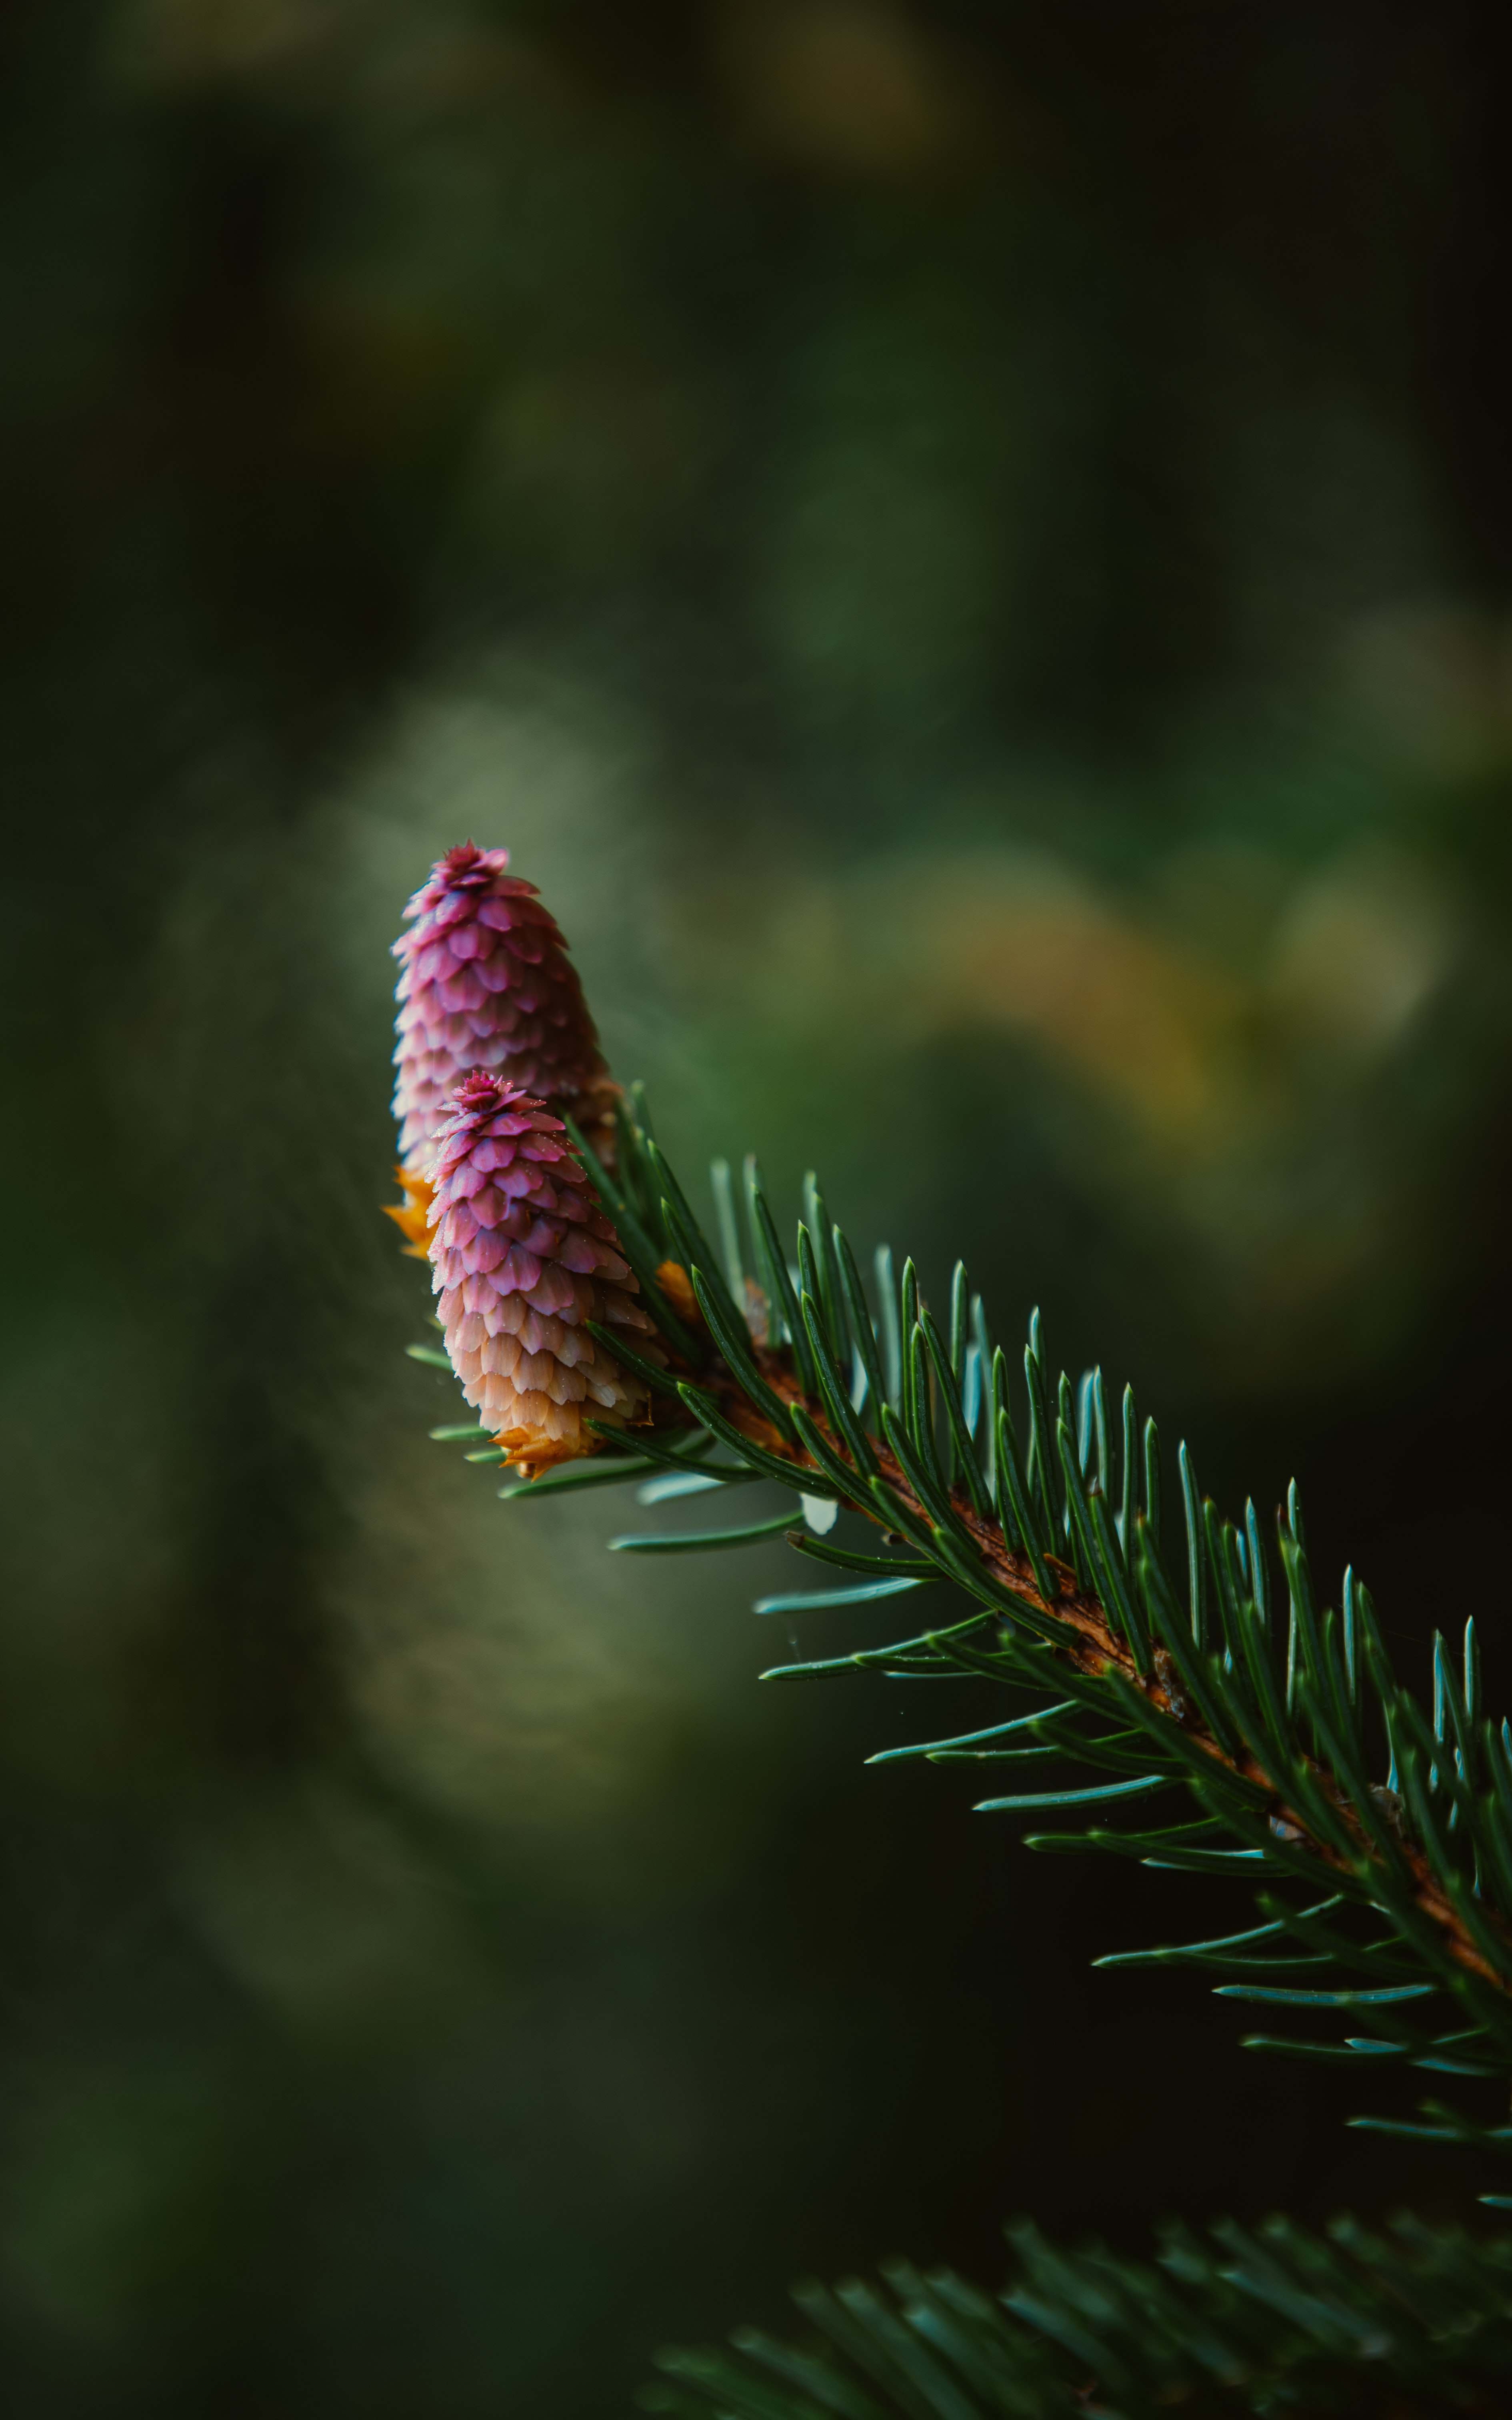 needle, nature, fir, spruce cone HD Wallpaper for Phone